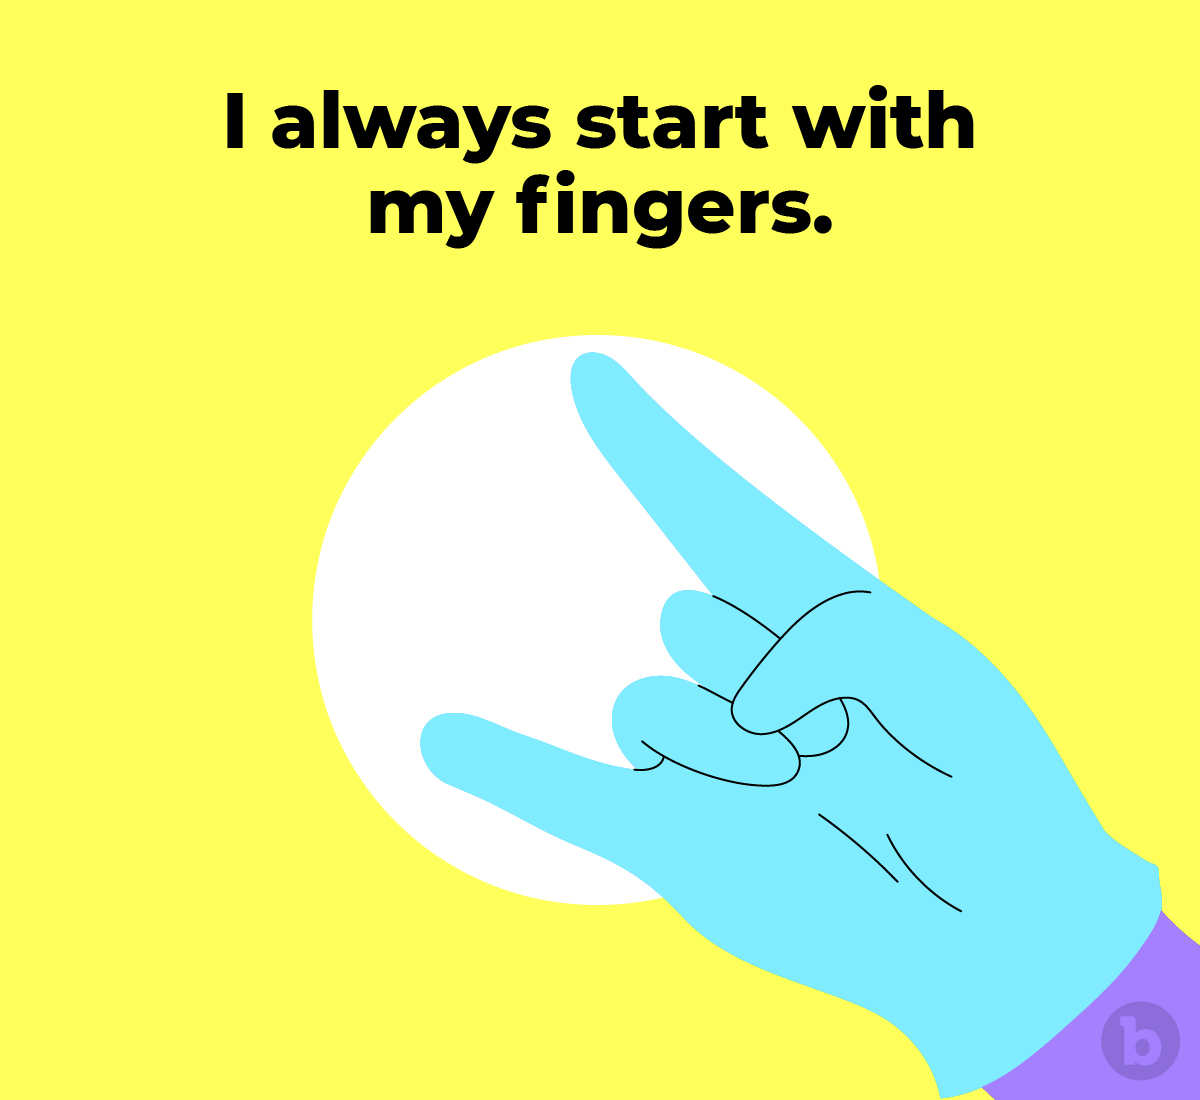 Start off with anal fingering before you try penile or toy penetration